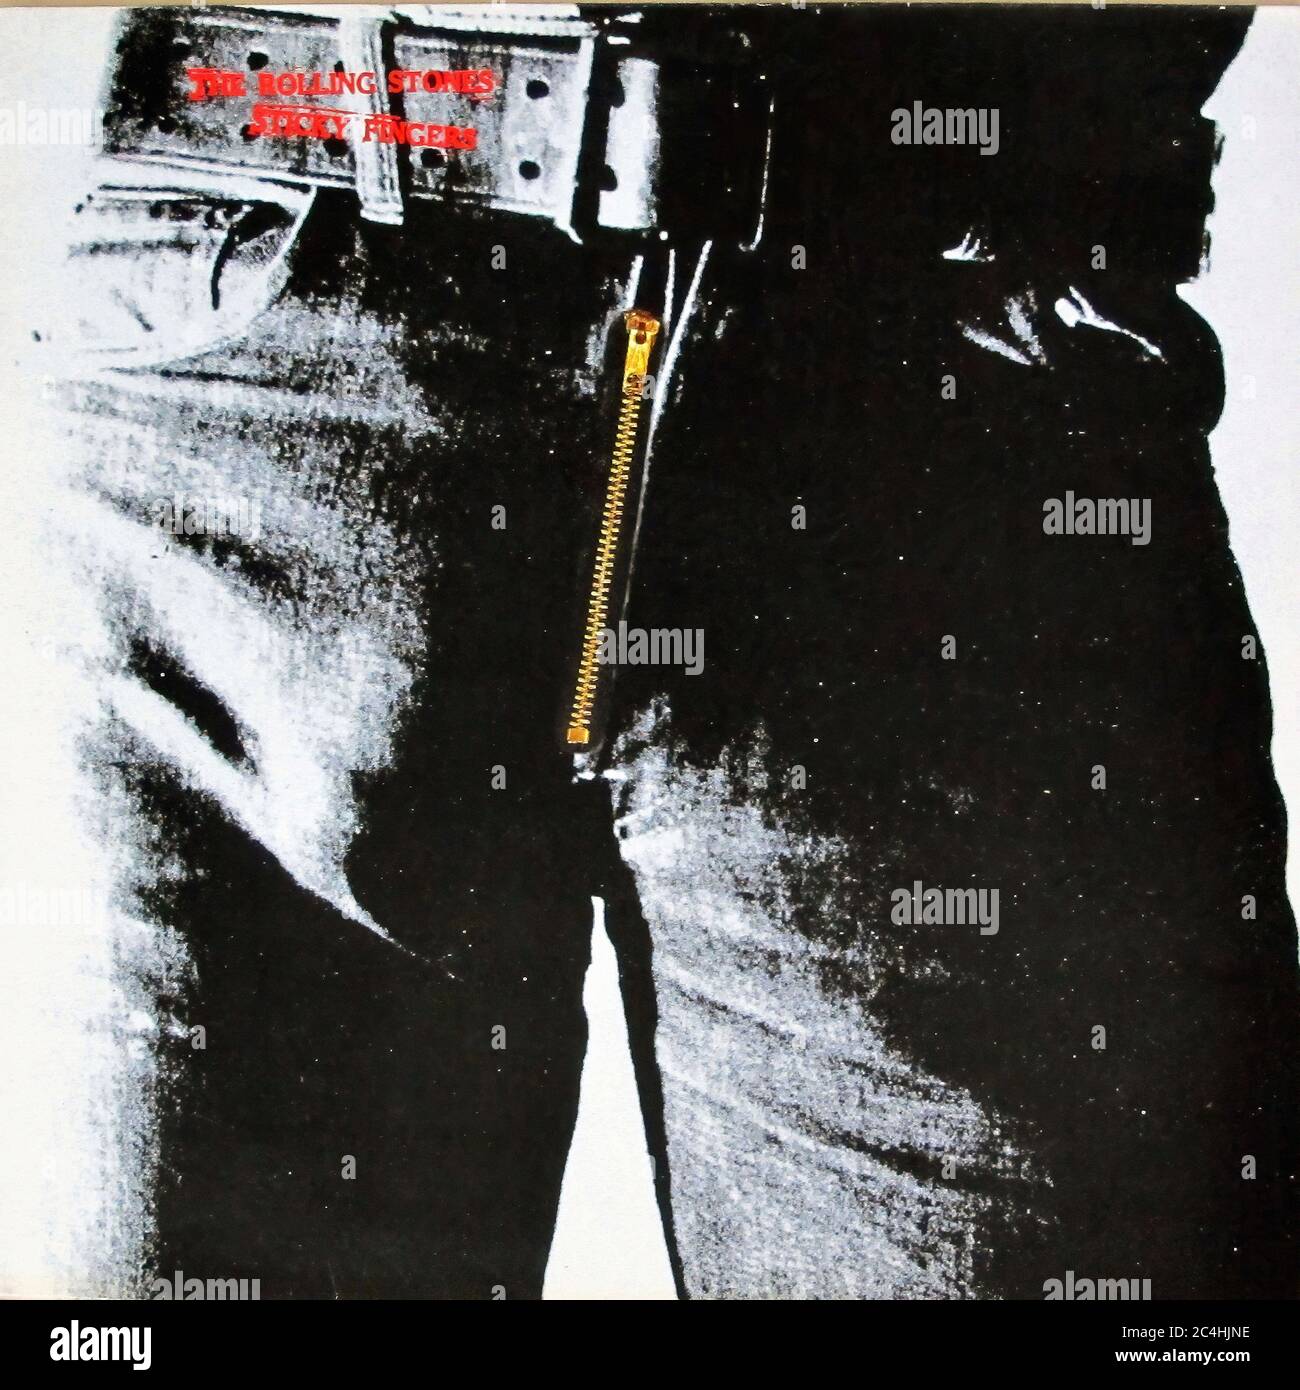 Rolling Stones Sticky Fingers 12'' Lp Vinyl - Vintage Record Cover Stock Photo